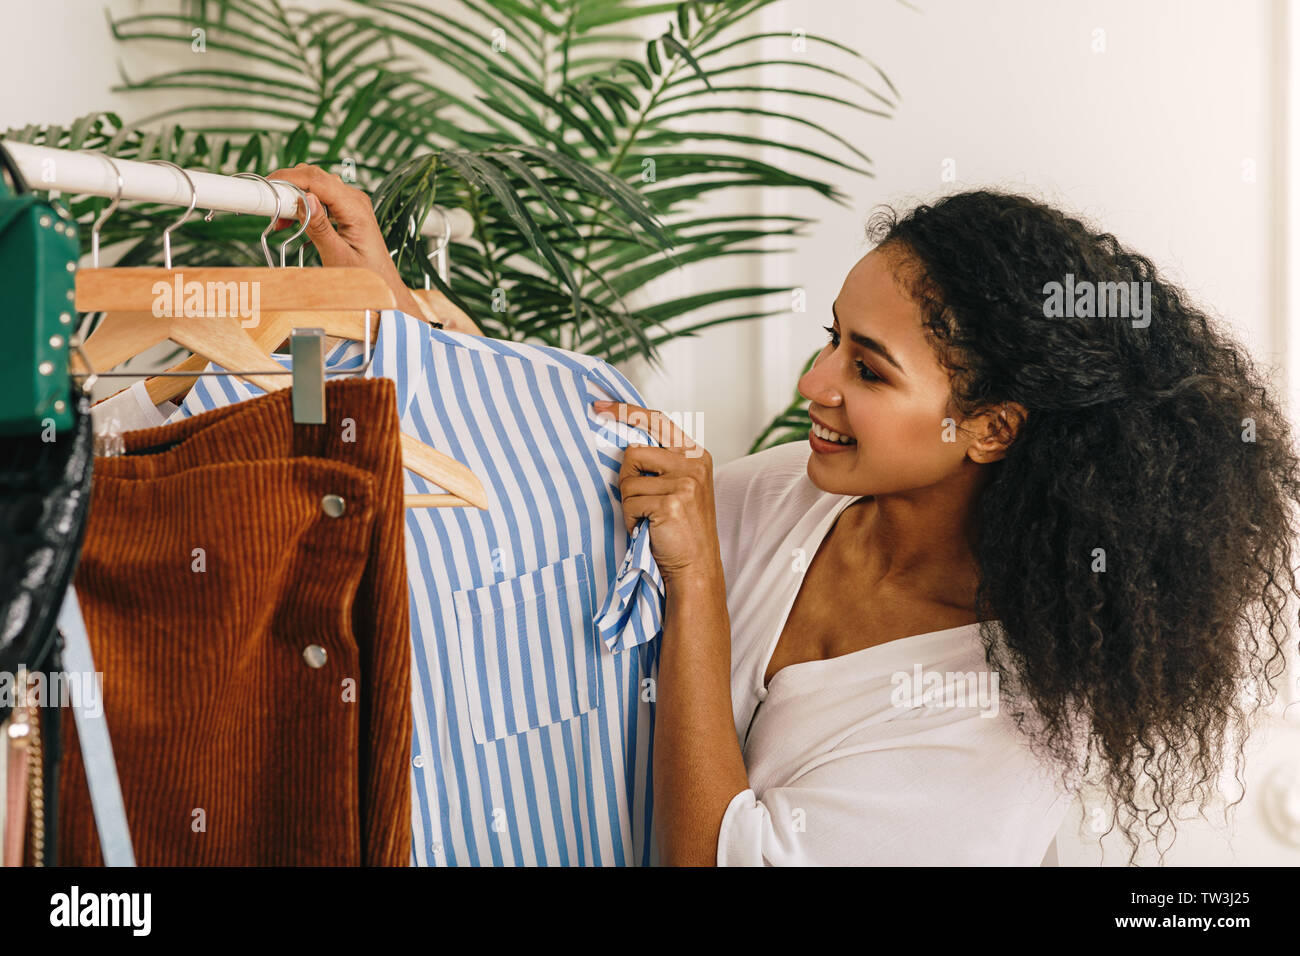 Da Wa, a post-90s fashion designer, poses for photos with her vintage  clothes to be sold on Alibaba's e-commerce platform Taobao at home  decorated wit Stock Photo - Alamy